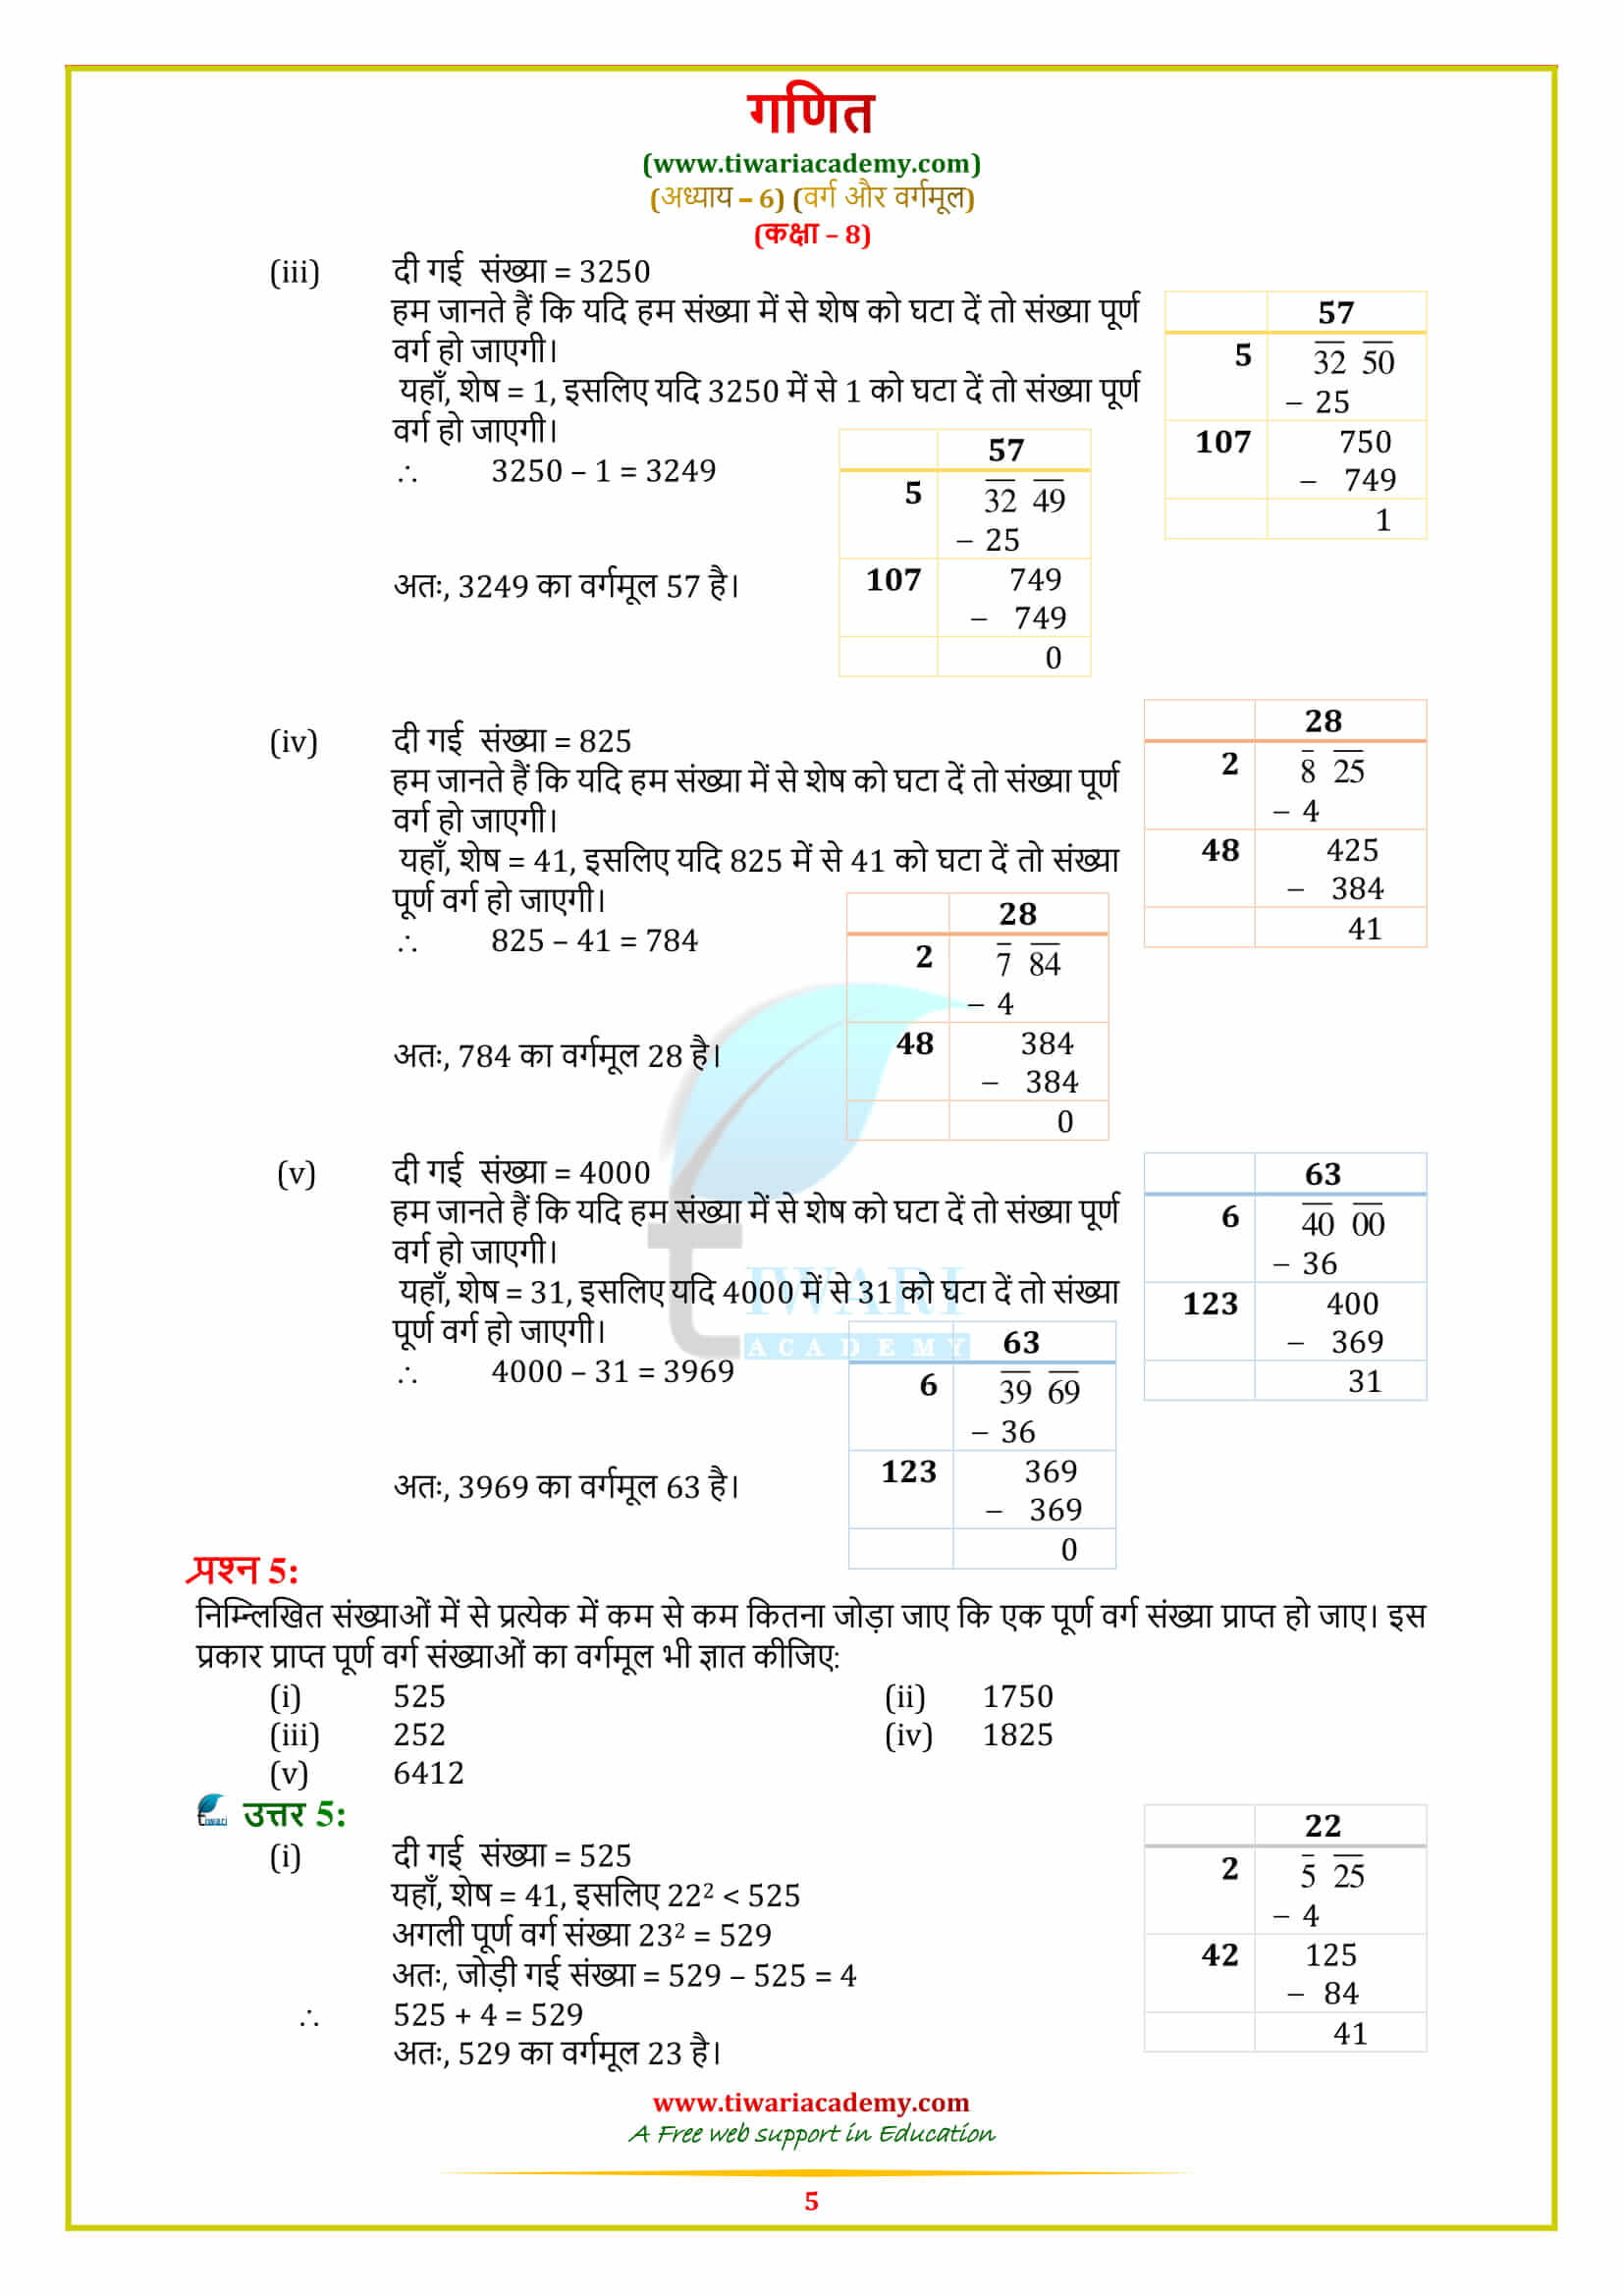 8 Maths Exercise 6.4 Solutions for cbse, mp board 2018-19